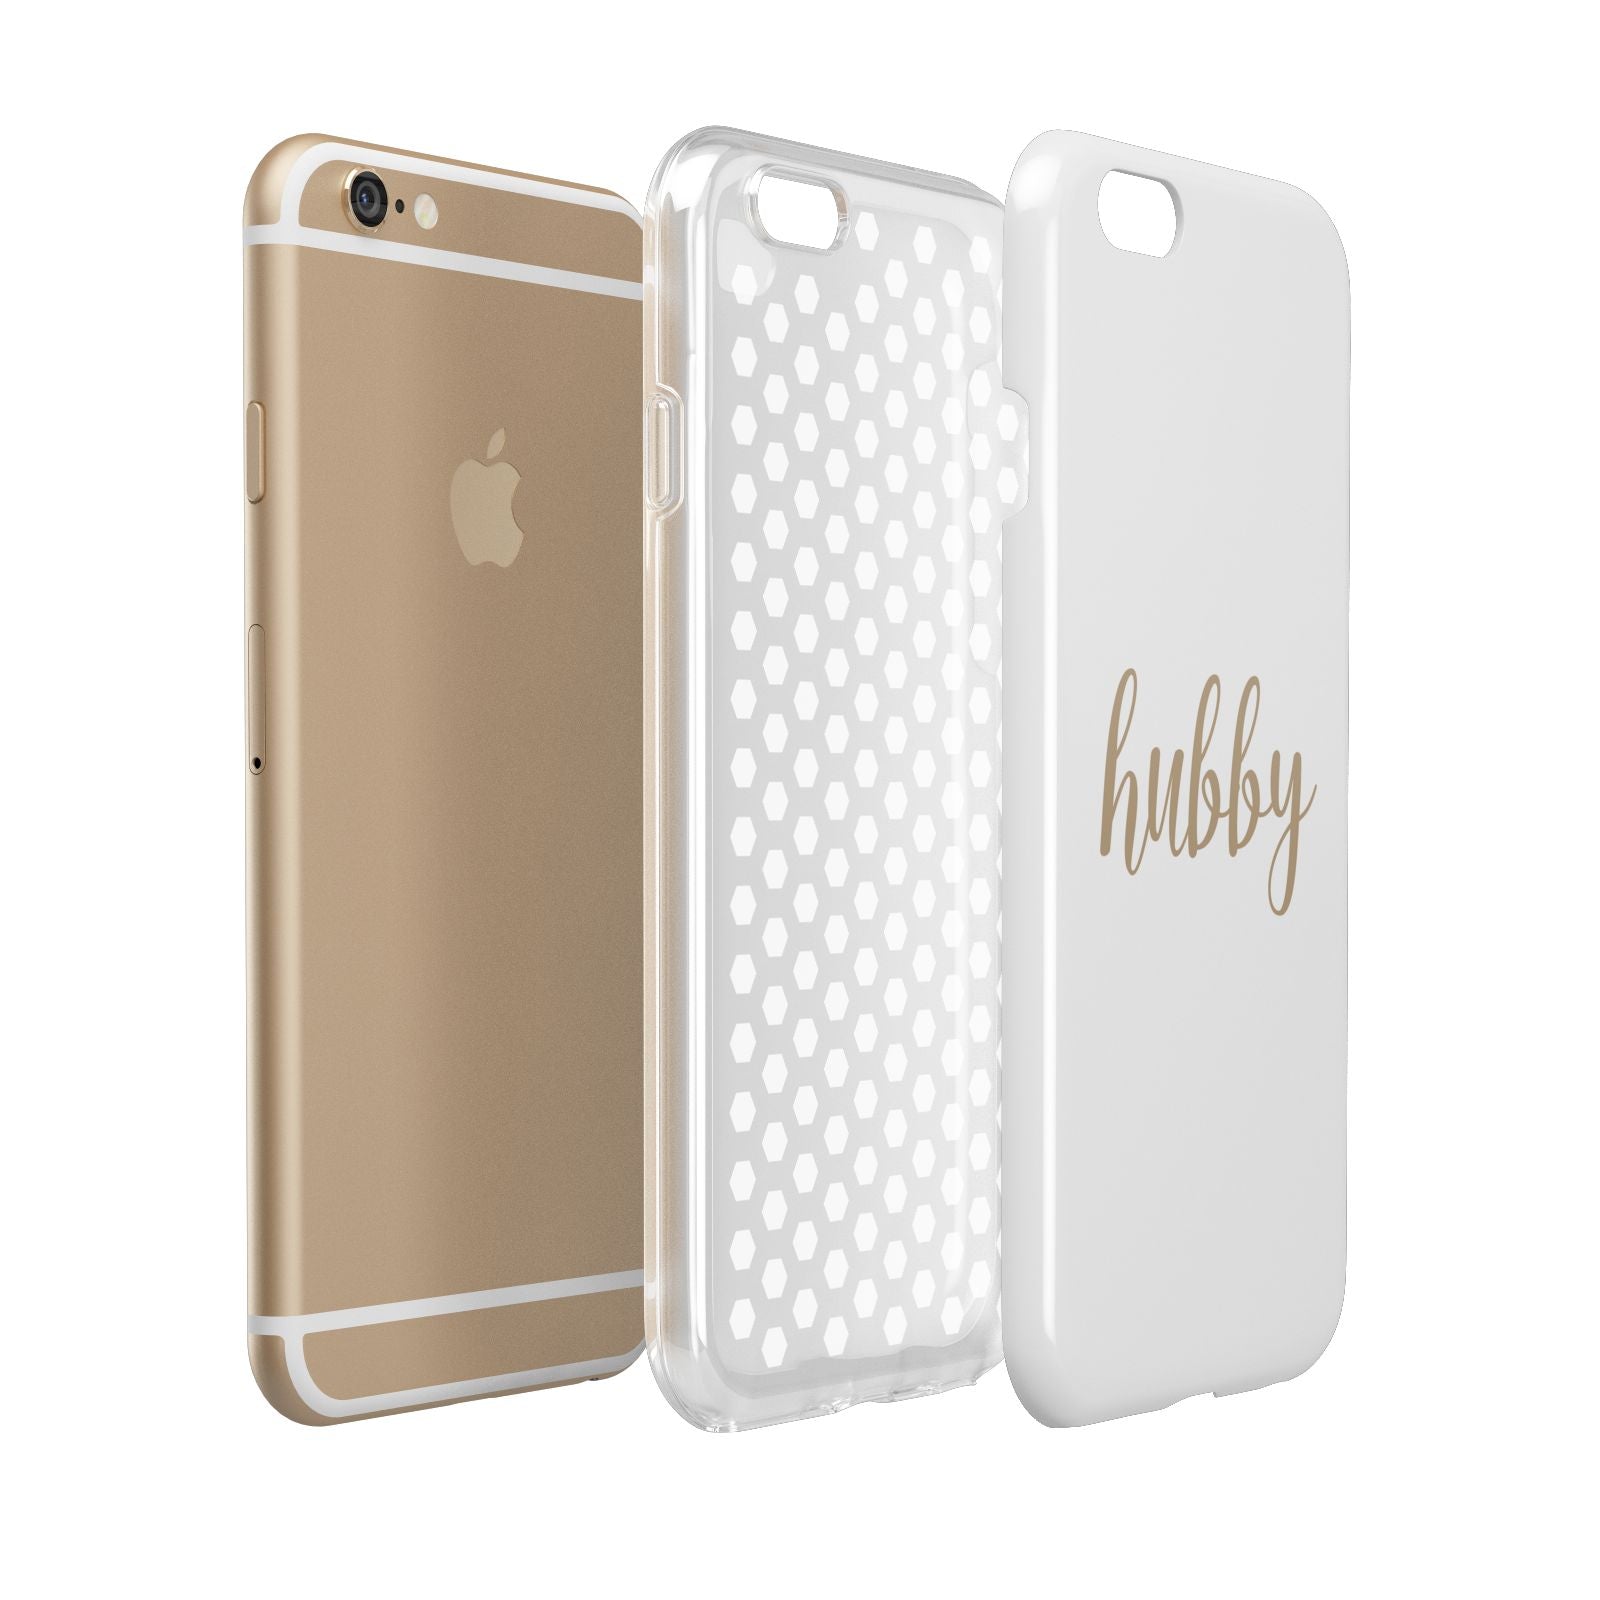 Hubby Apple iPhone 6 3D Tough Case Expanded view